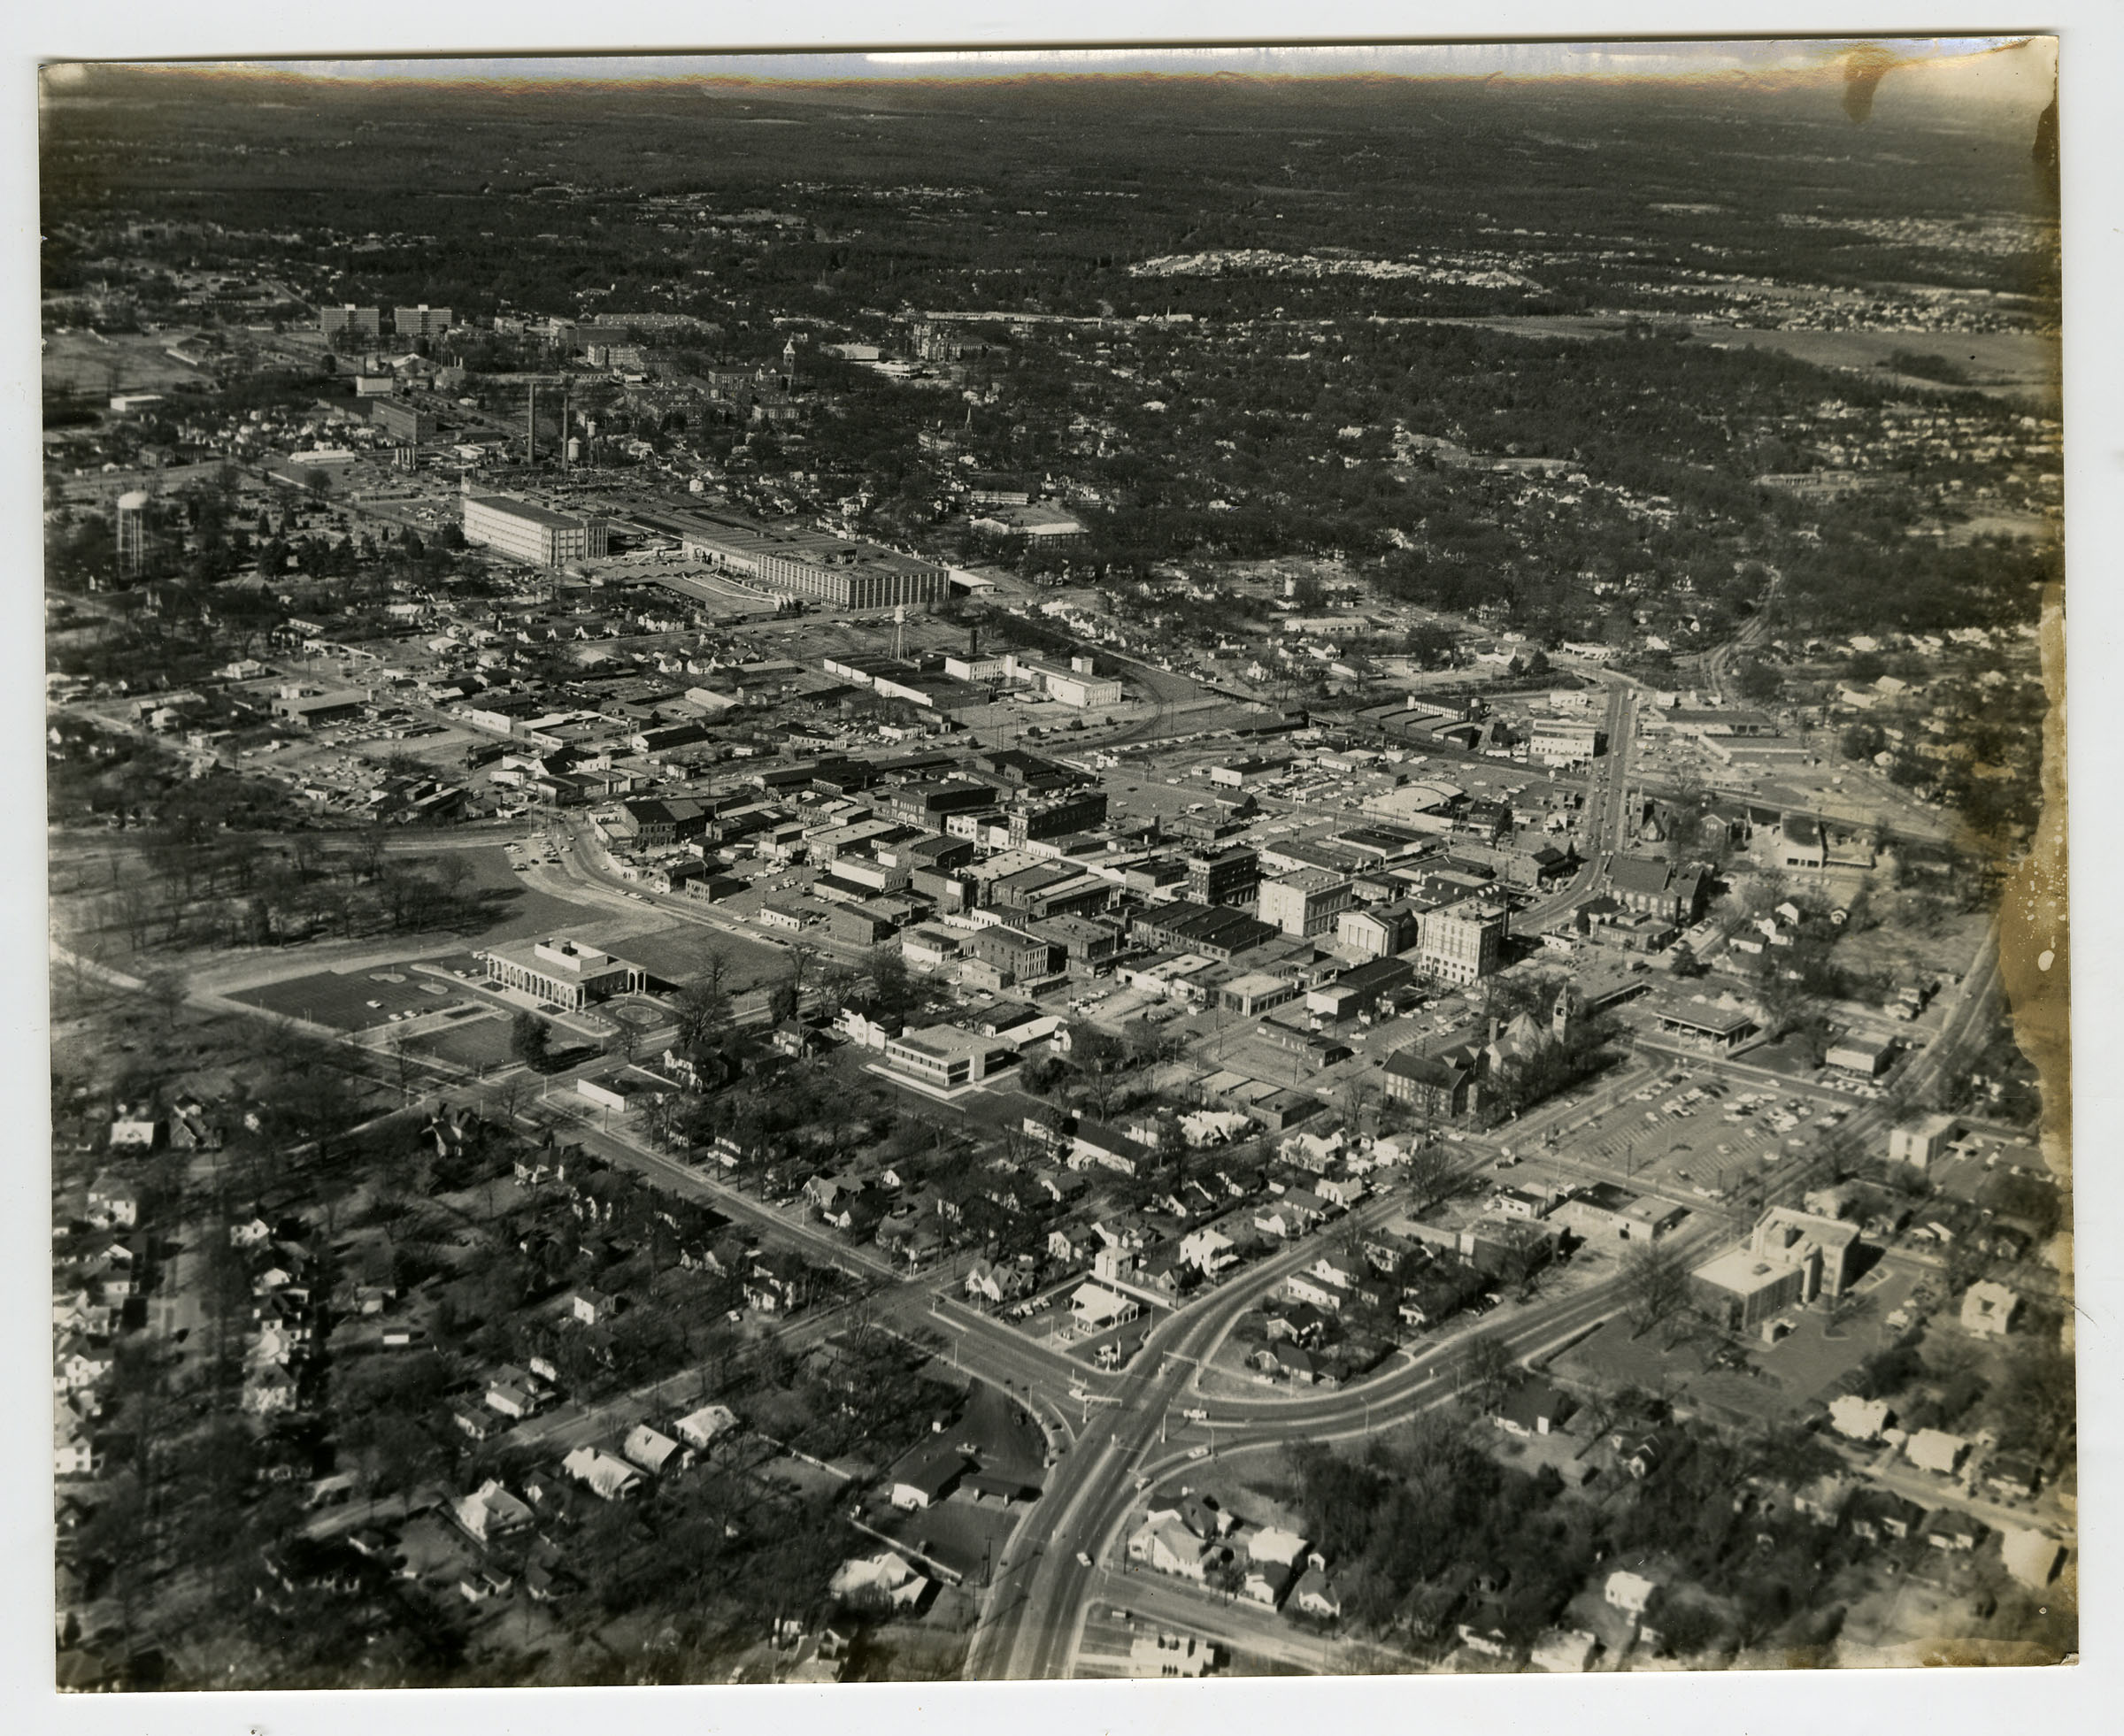 VIEW CA. 1972 OF HAMPTON STREET AND DOWNTOWN ROCK HILL: COURTESY OF WU PETTUS ARCHIVES - 2024 BY PHOTOGRAPHER BOB BRYANT